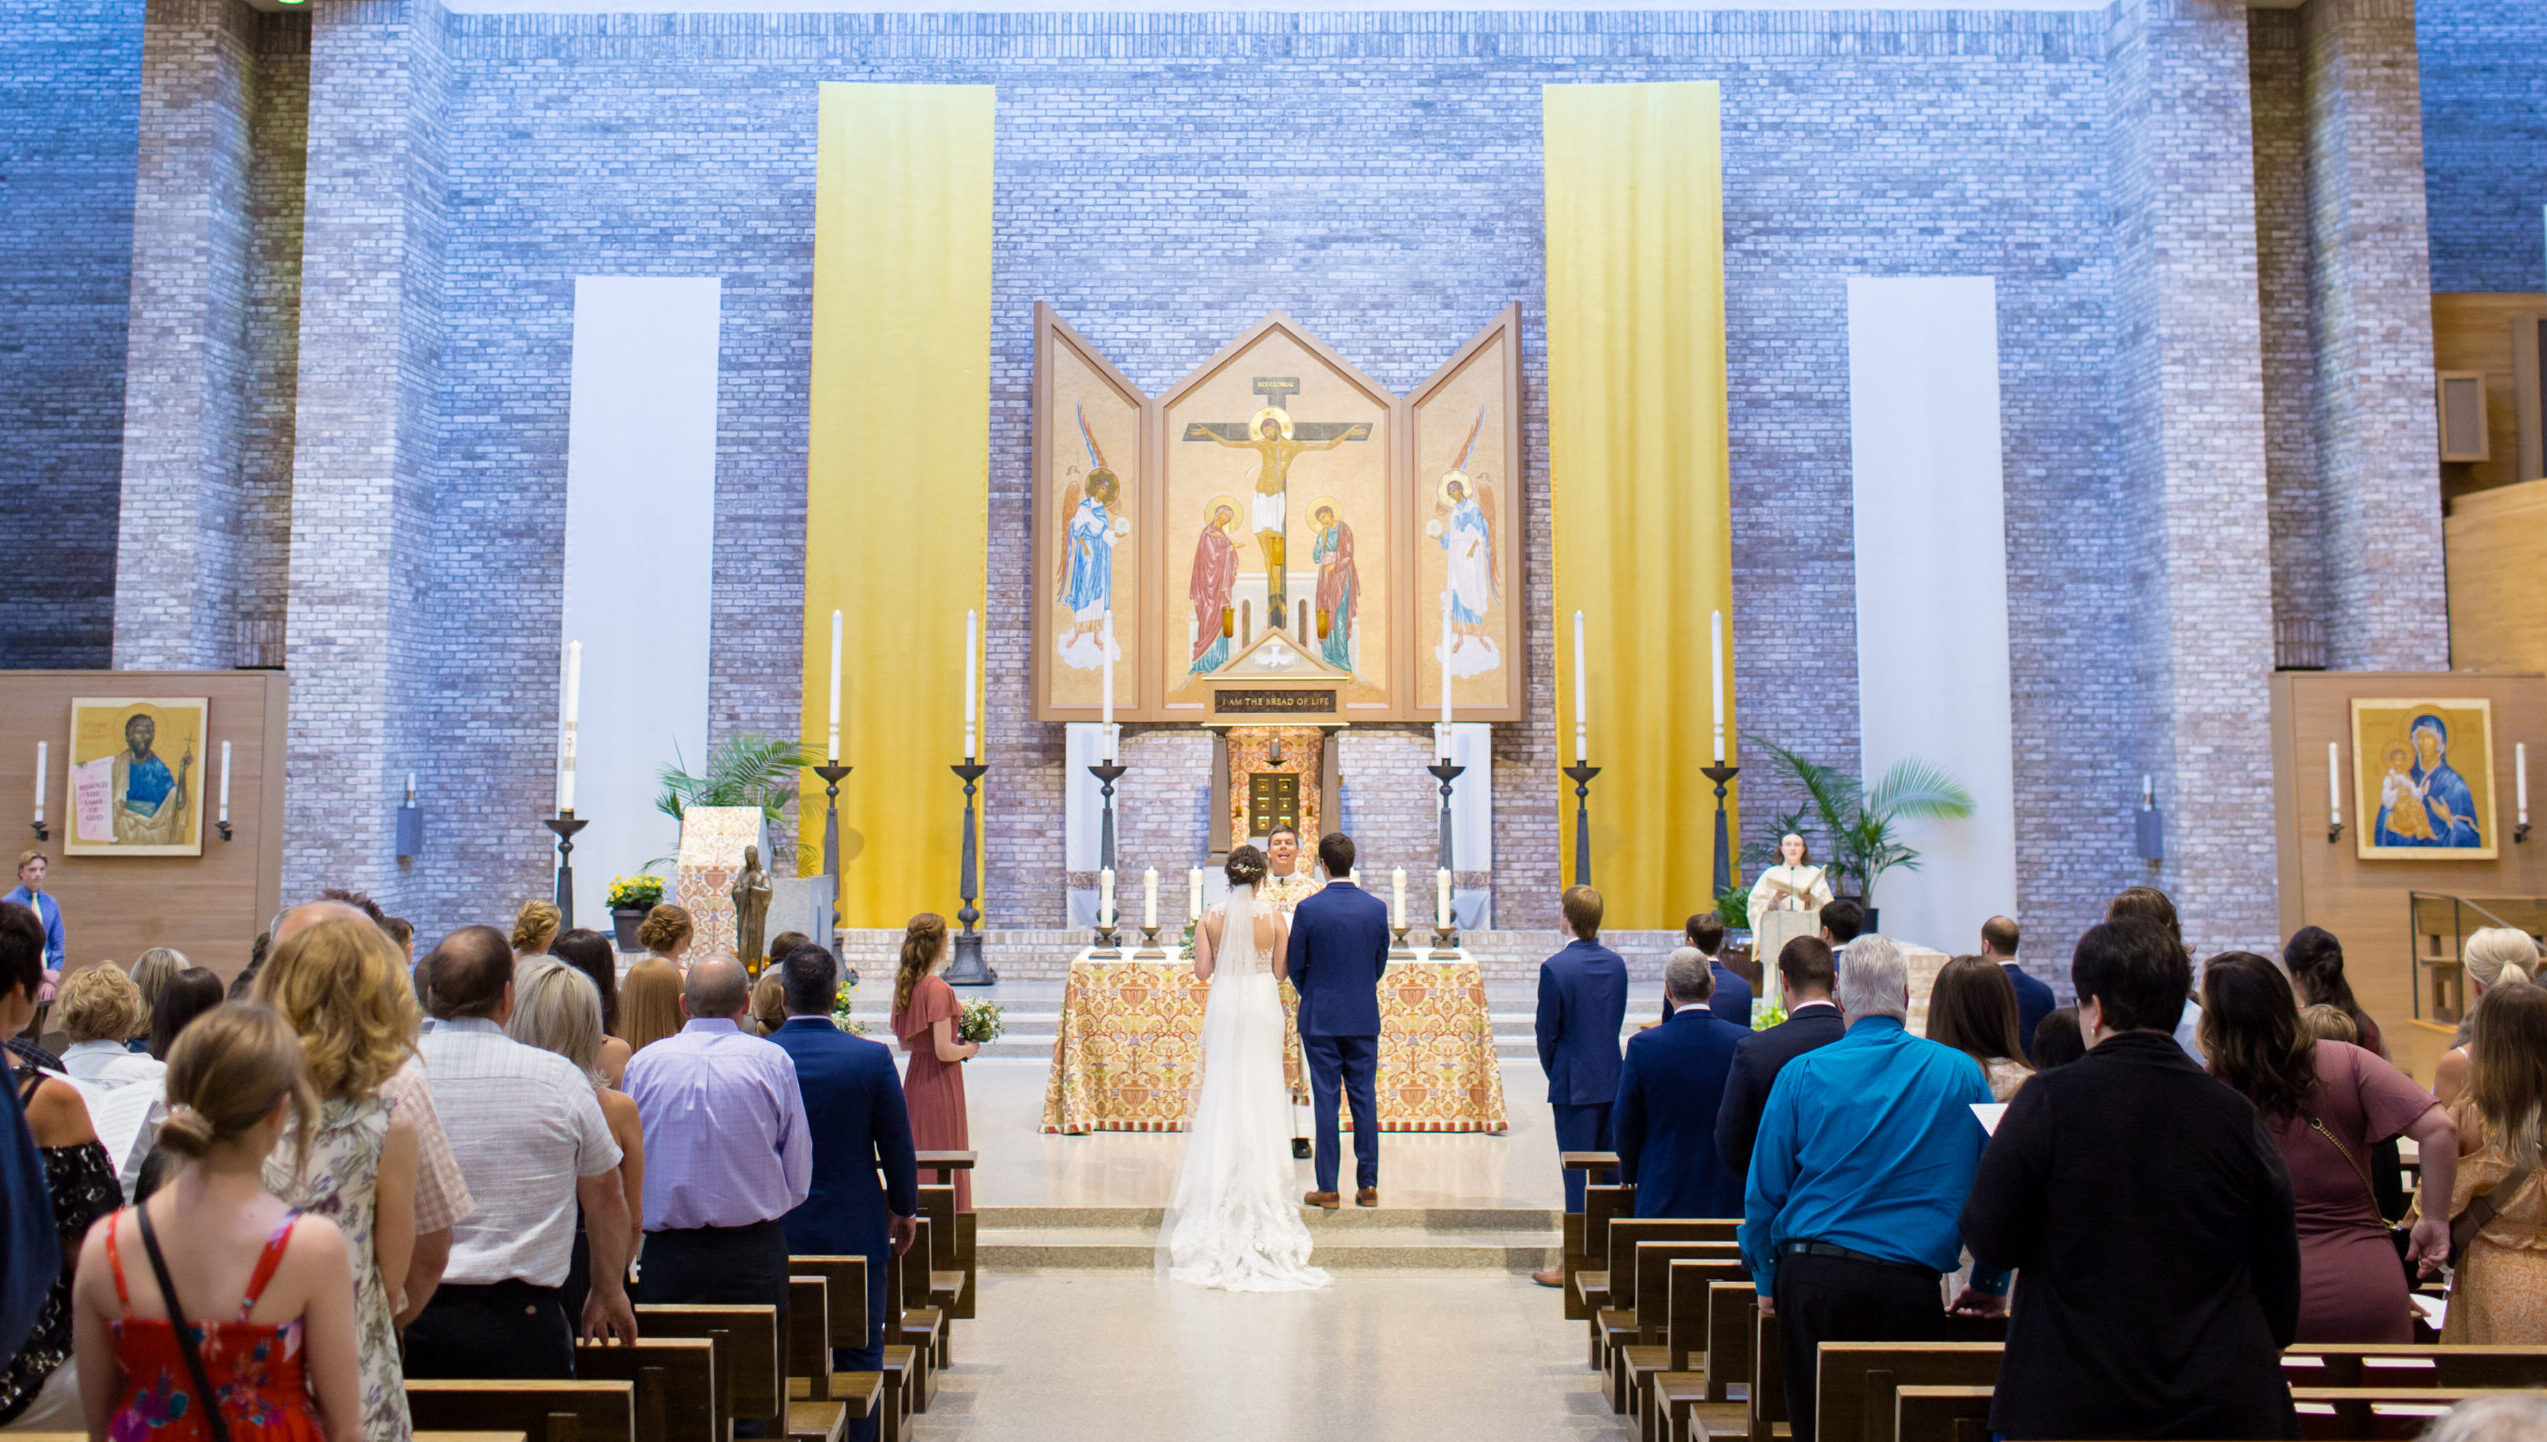 Couple at altar exchanging vows at Catholic Church